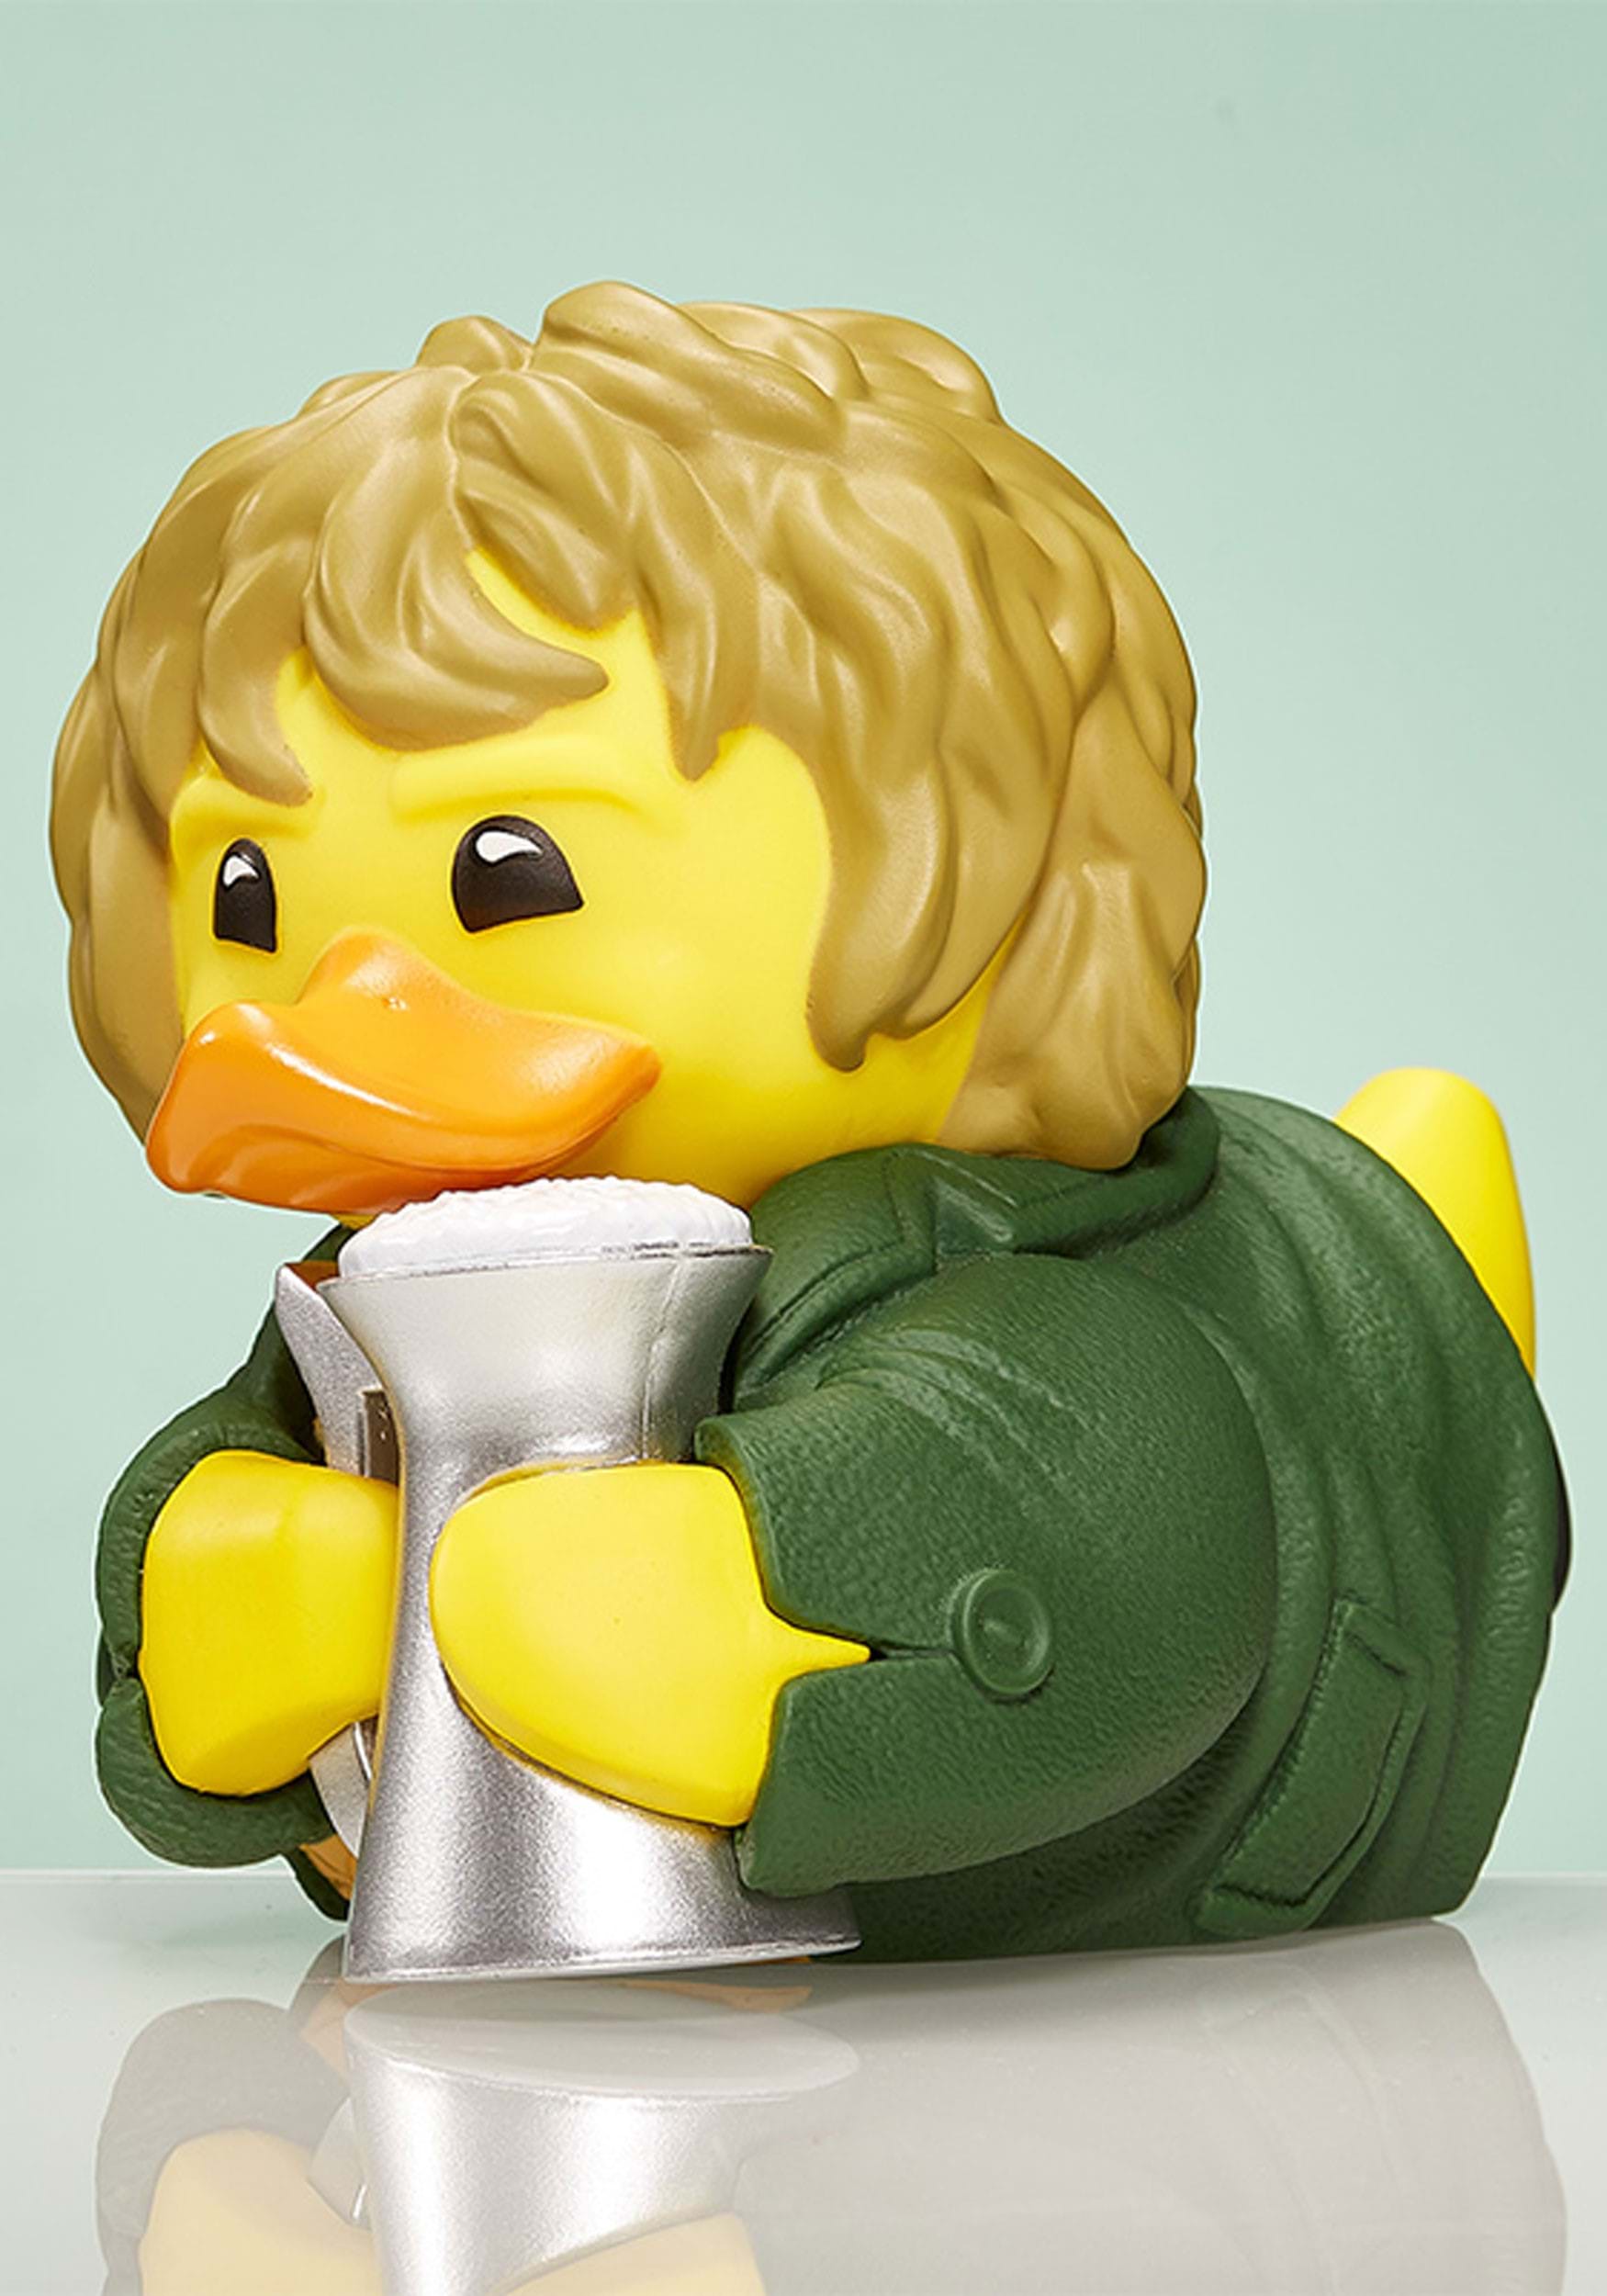 Lord of the Rings Merry TUBBZ Cosplaying Duck Collectible